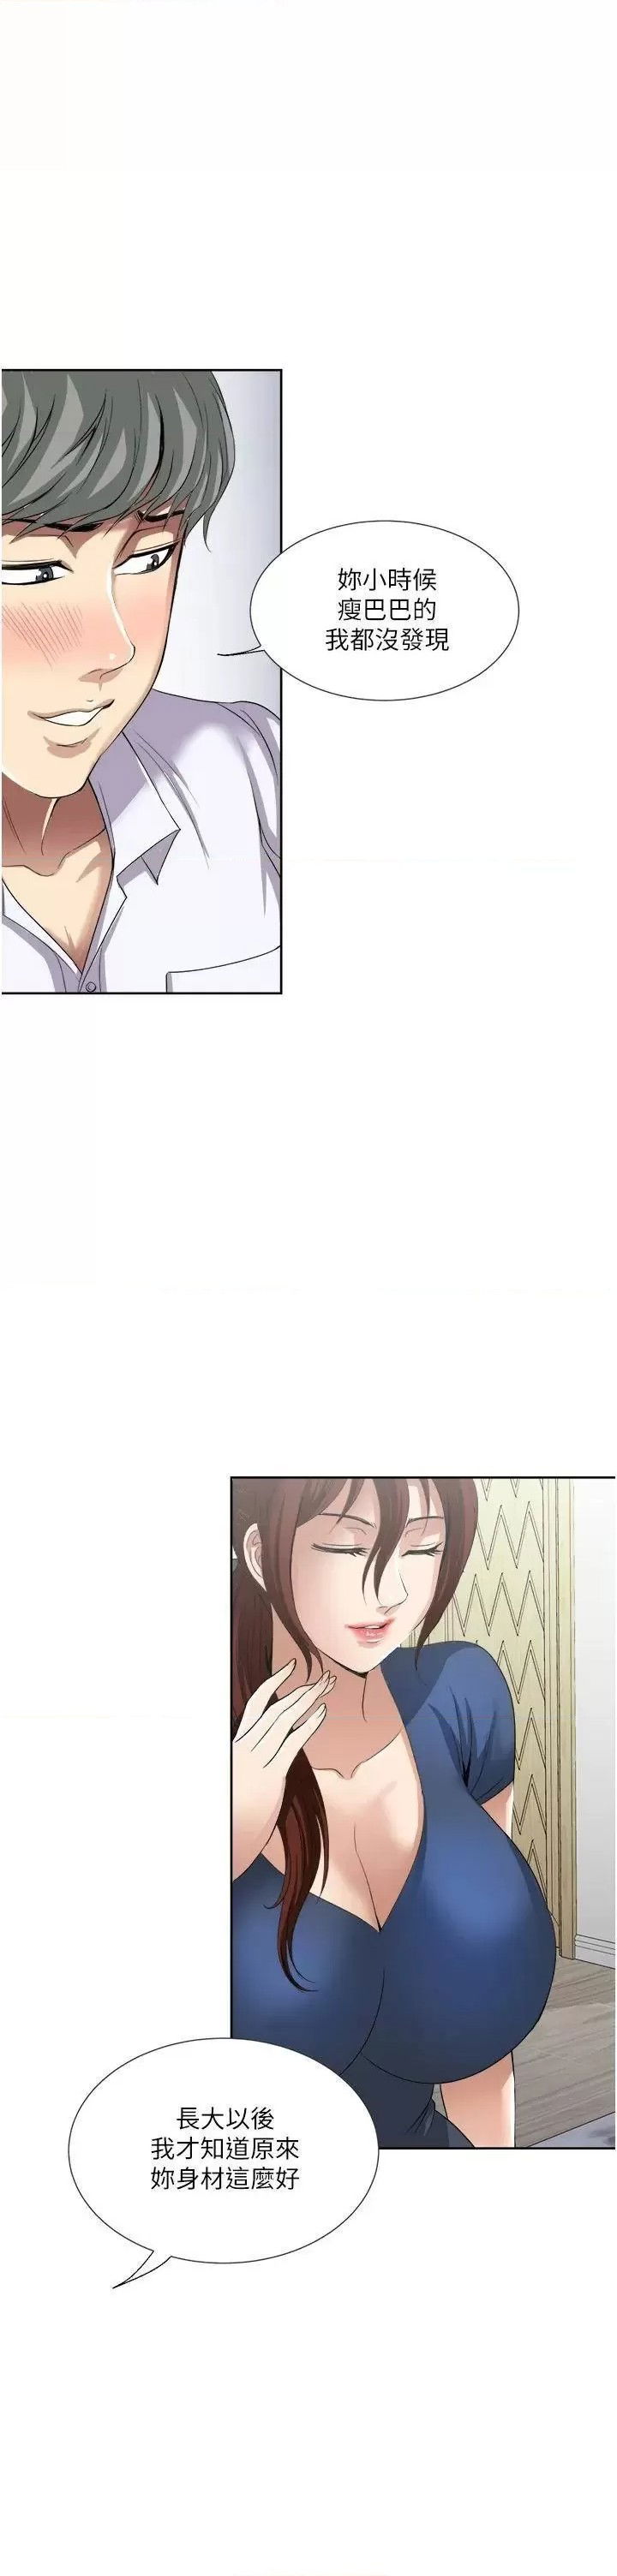 just-once-raw-chap-25-20